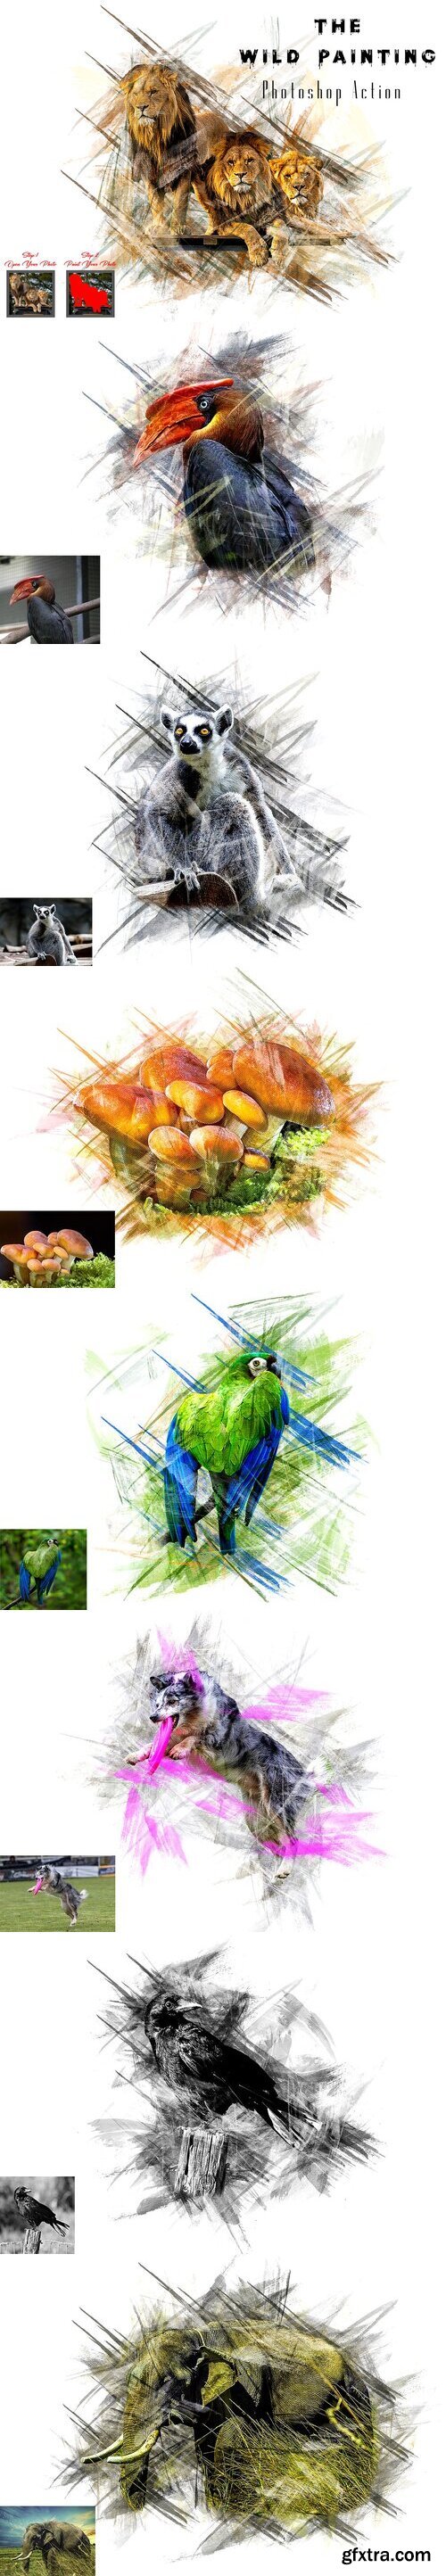 CreativeMarket - The Wild Painting Photoshop Action 10320676